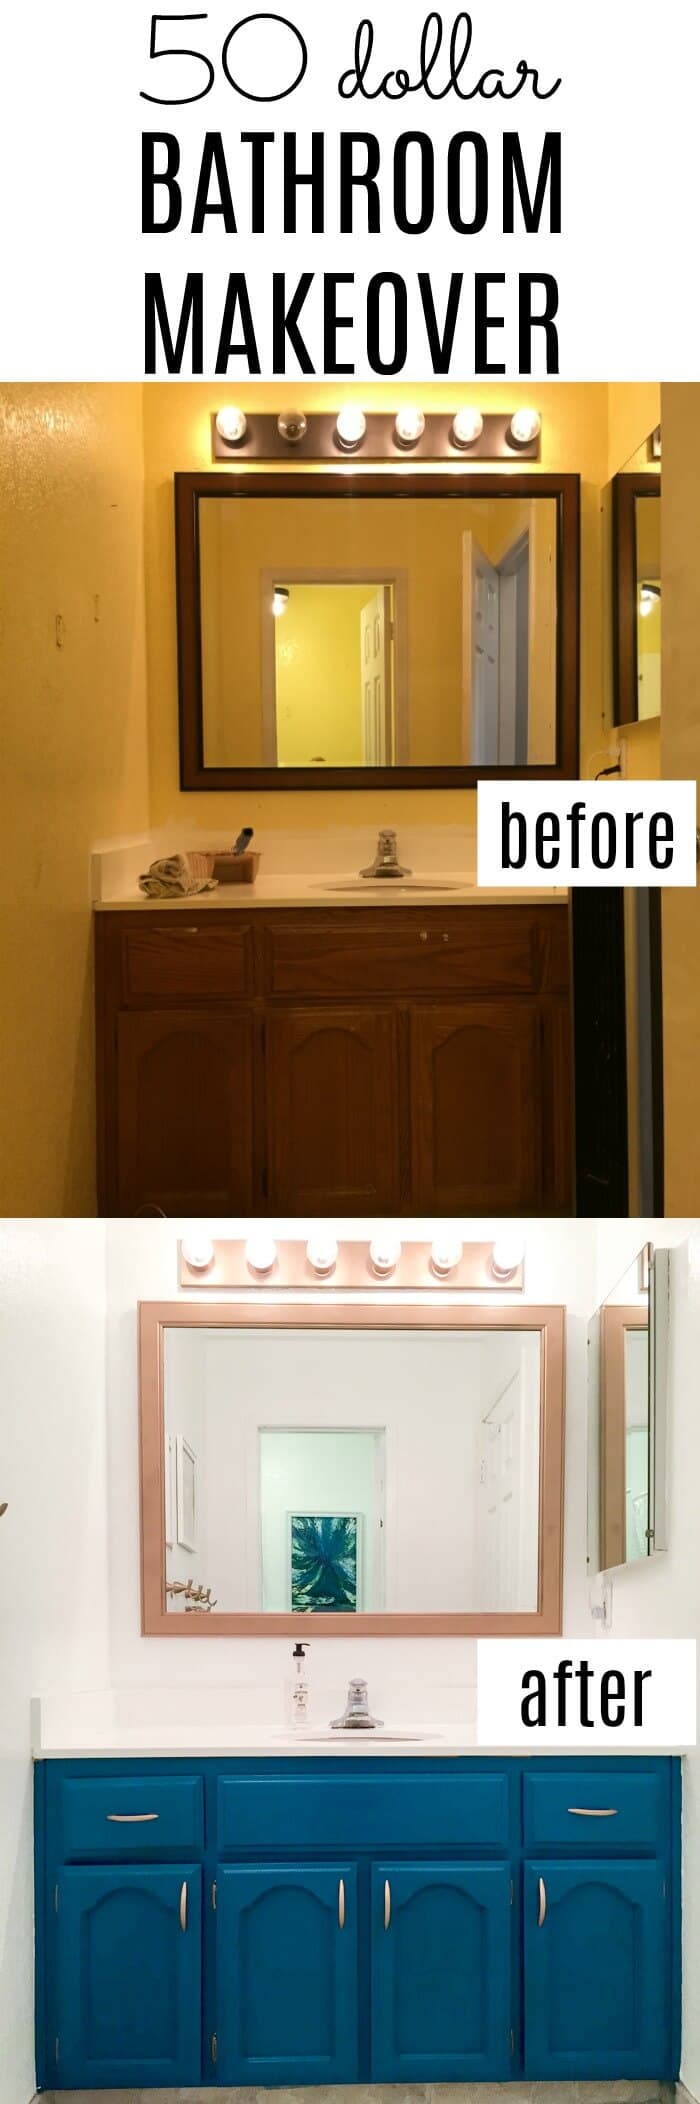 50 dollar bathroom makeover.  We turned this off-white and brown 80's bathroom into a modern dream with just a few changes.  We were able to paint the tile and paint the vanity top changing the look of the bathroom dramatically.  Bathroom Makeover on a budget.  DIY Bathroom.  Modern Blue Bathroom.  www.madewithhappy.com